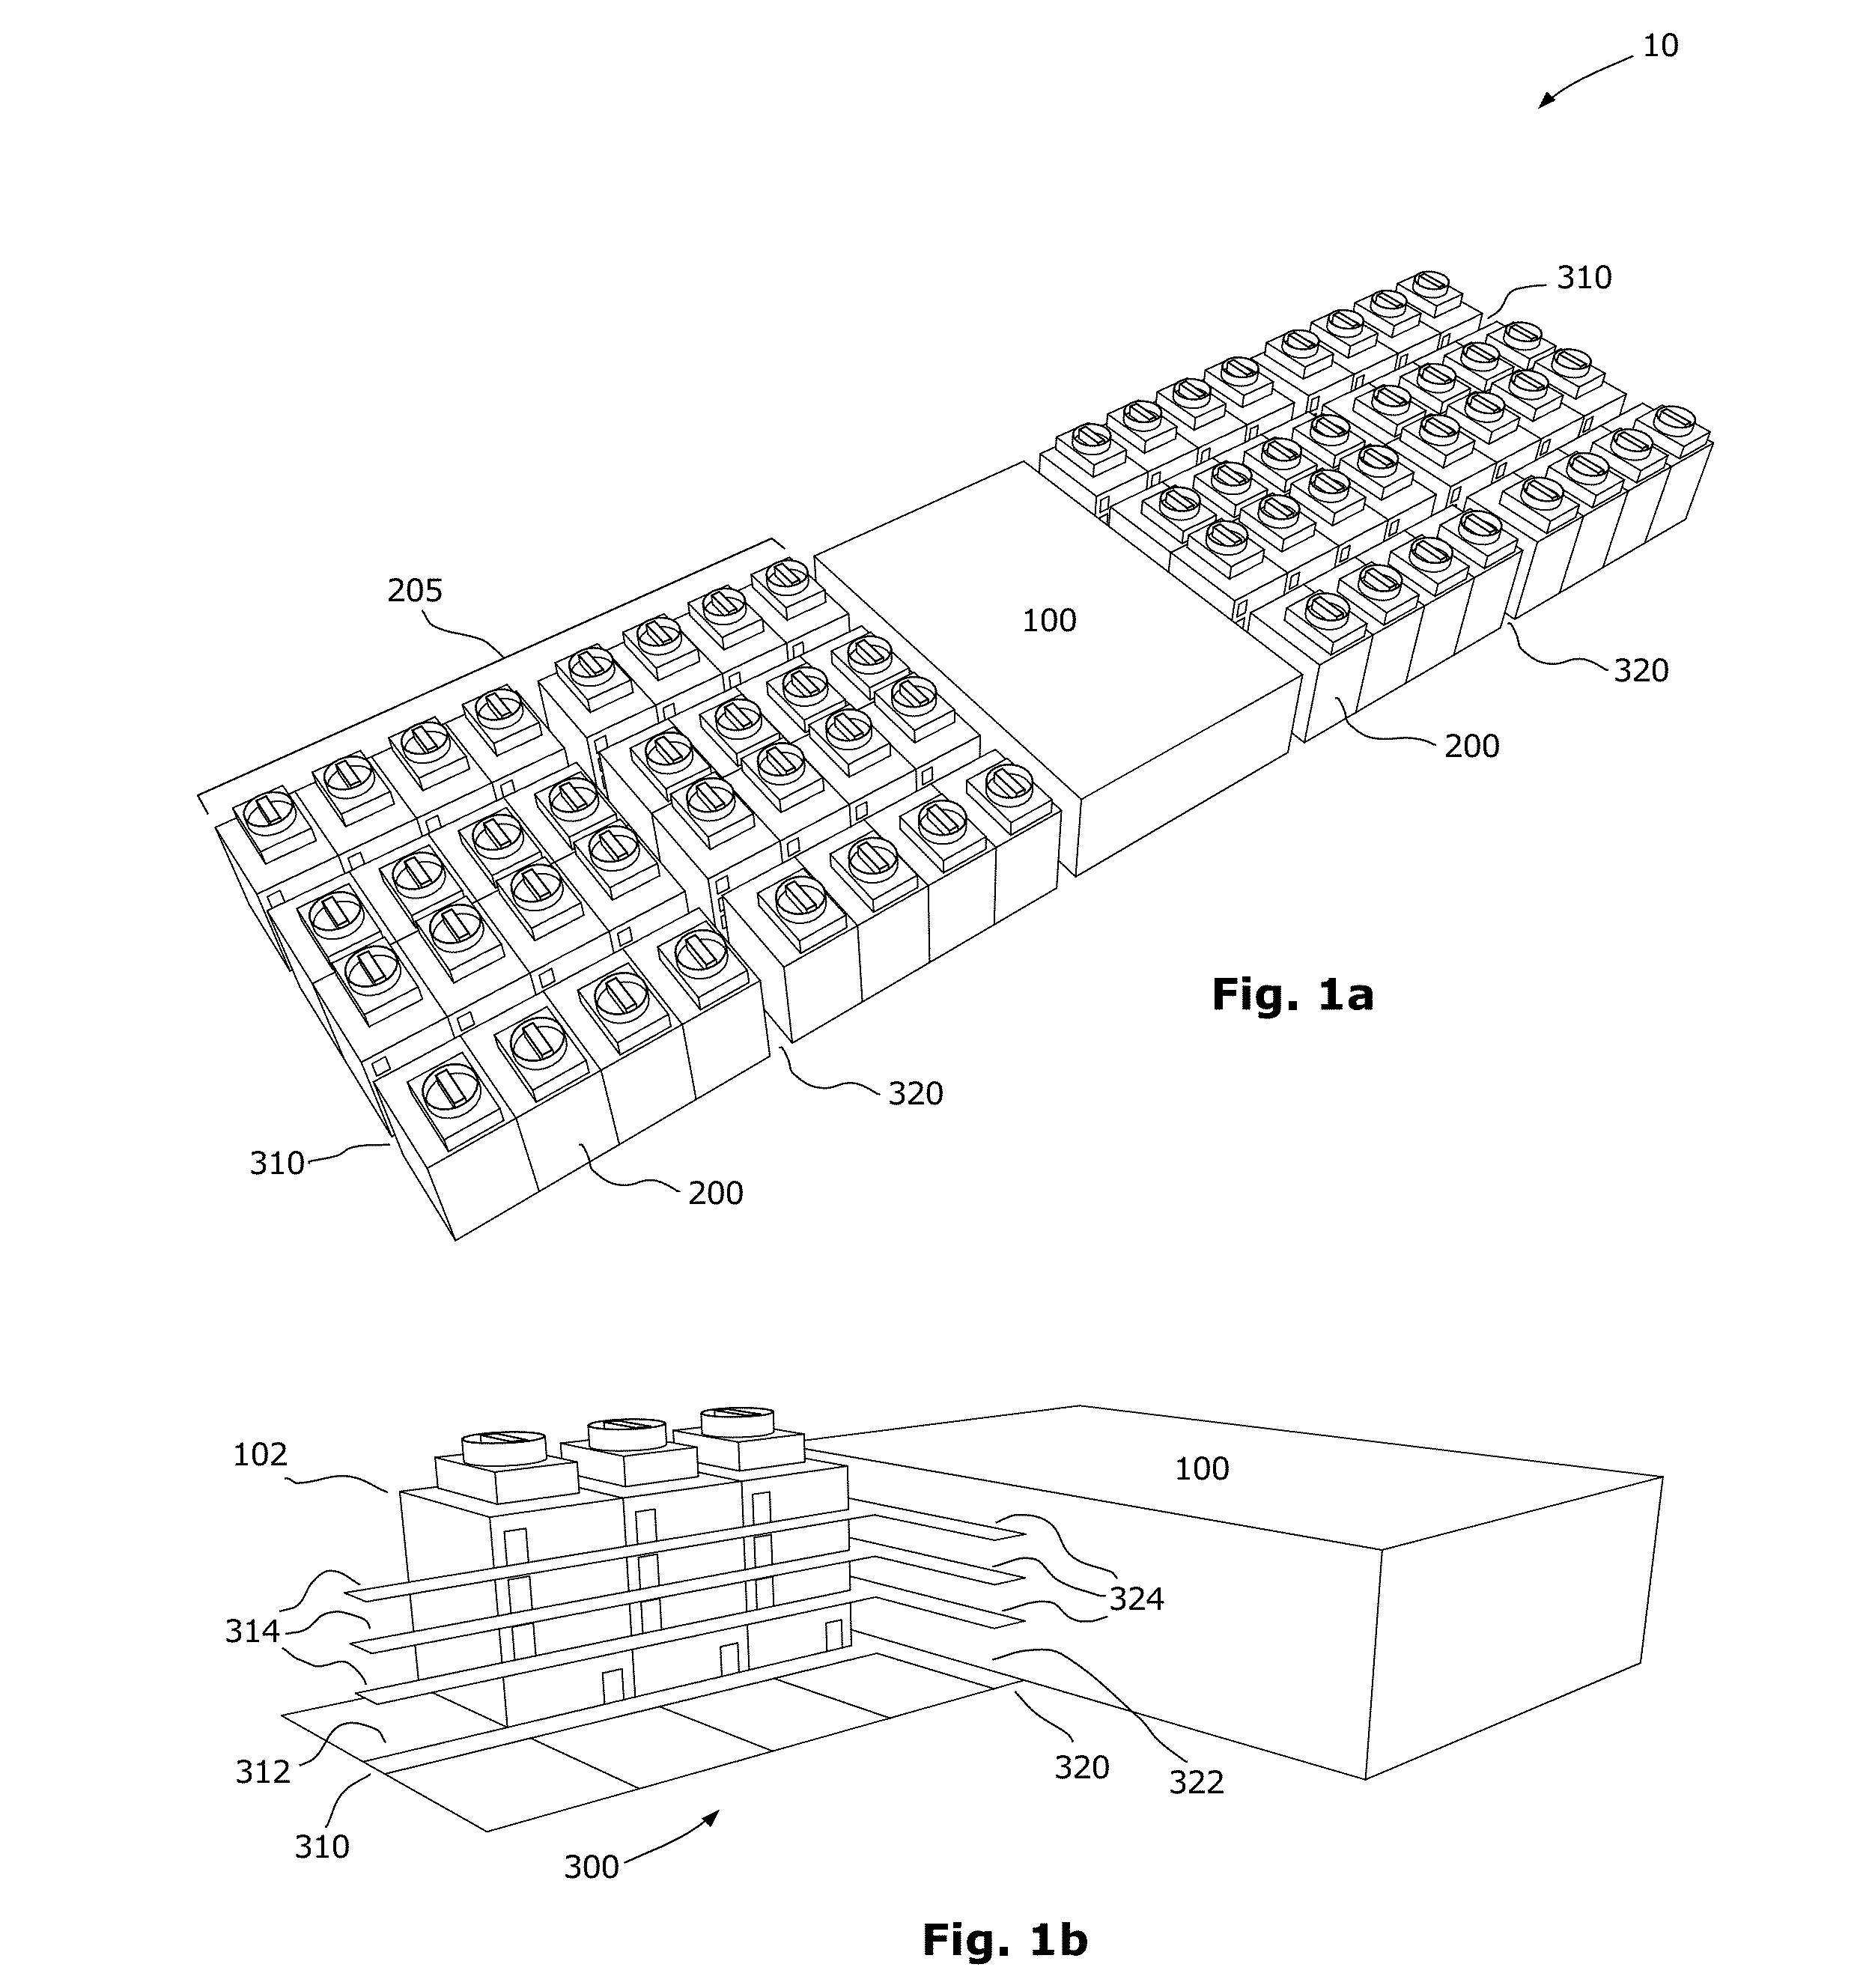 Prefabricated vertical data center modules and method of large-scale deployment